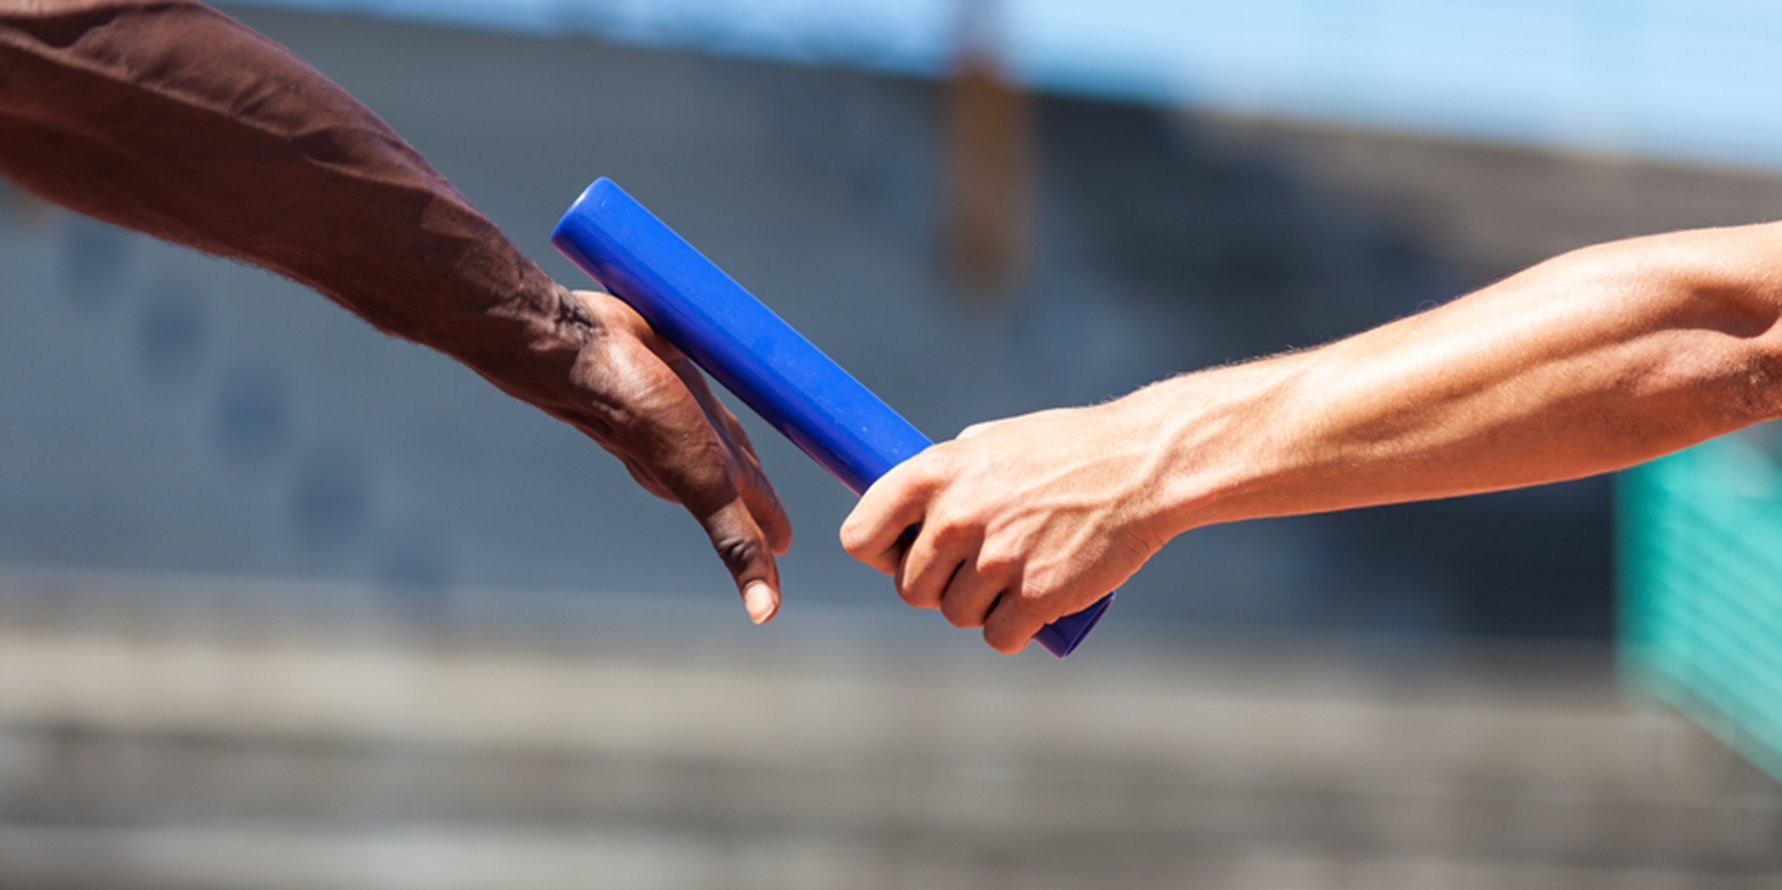 Photograph of one athlete's hand passing a baton to another athlete's hand